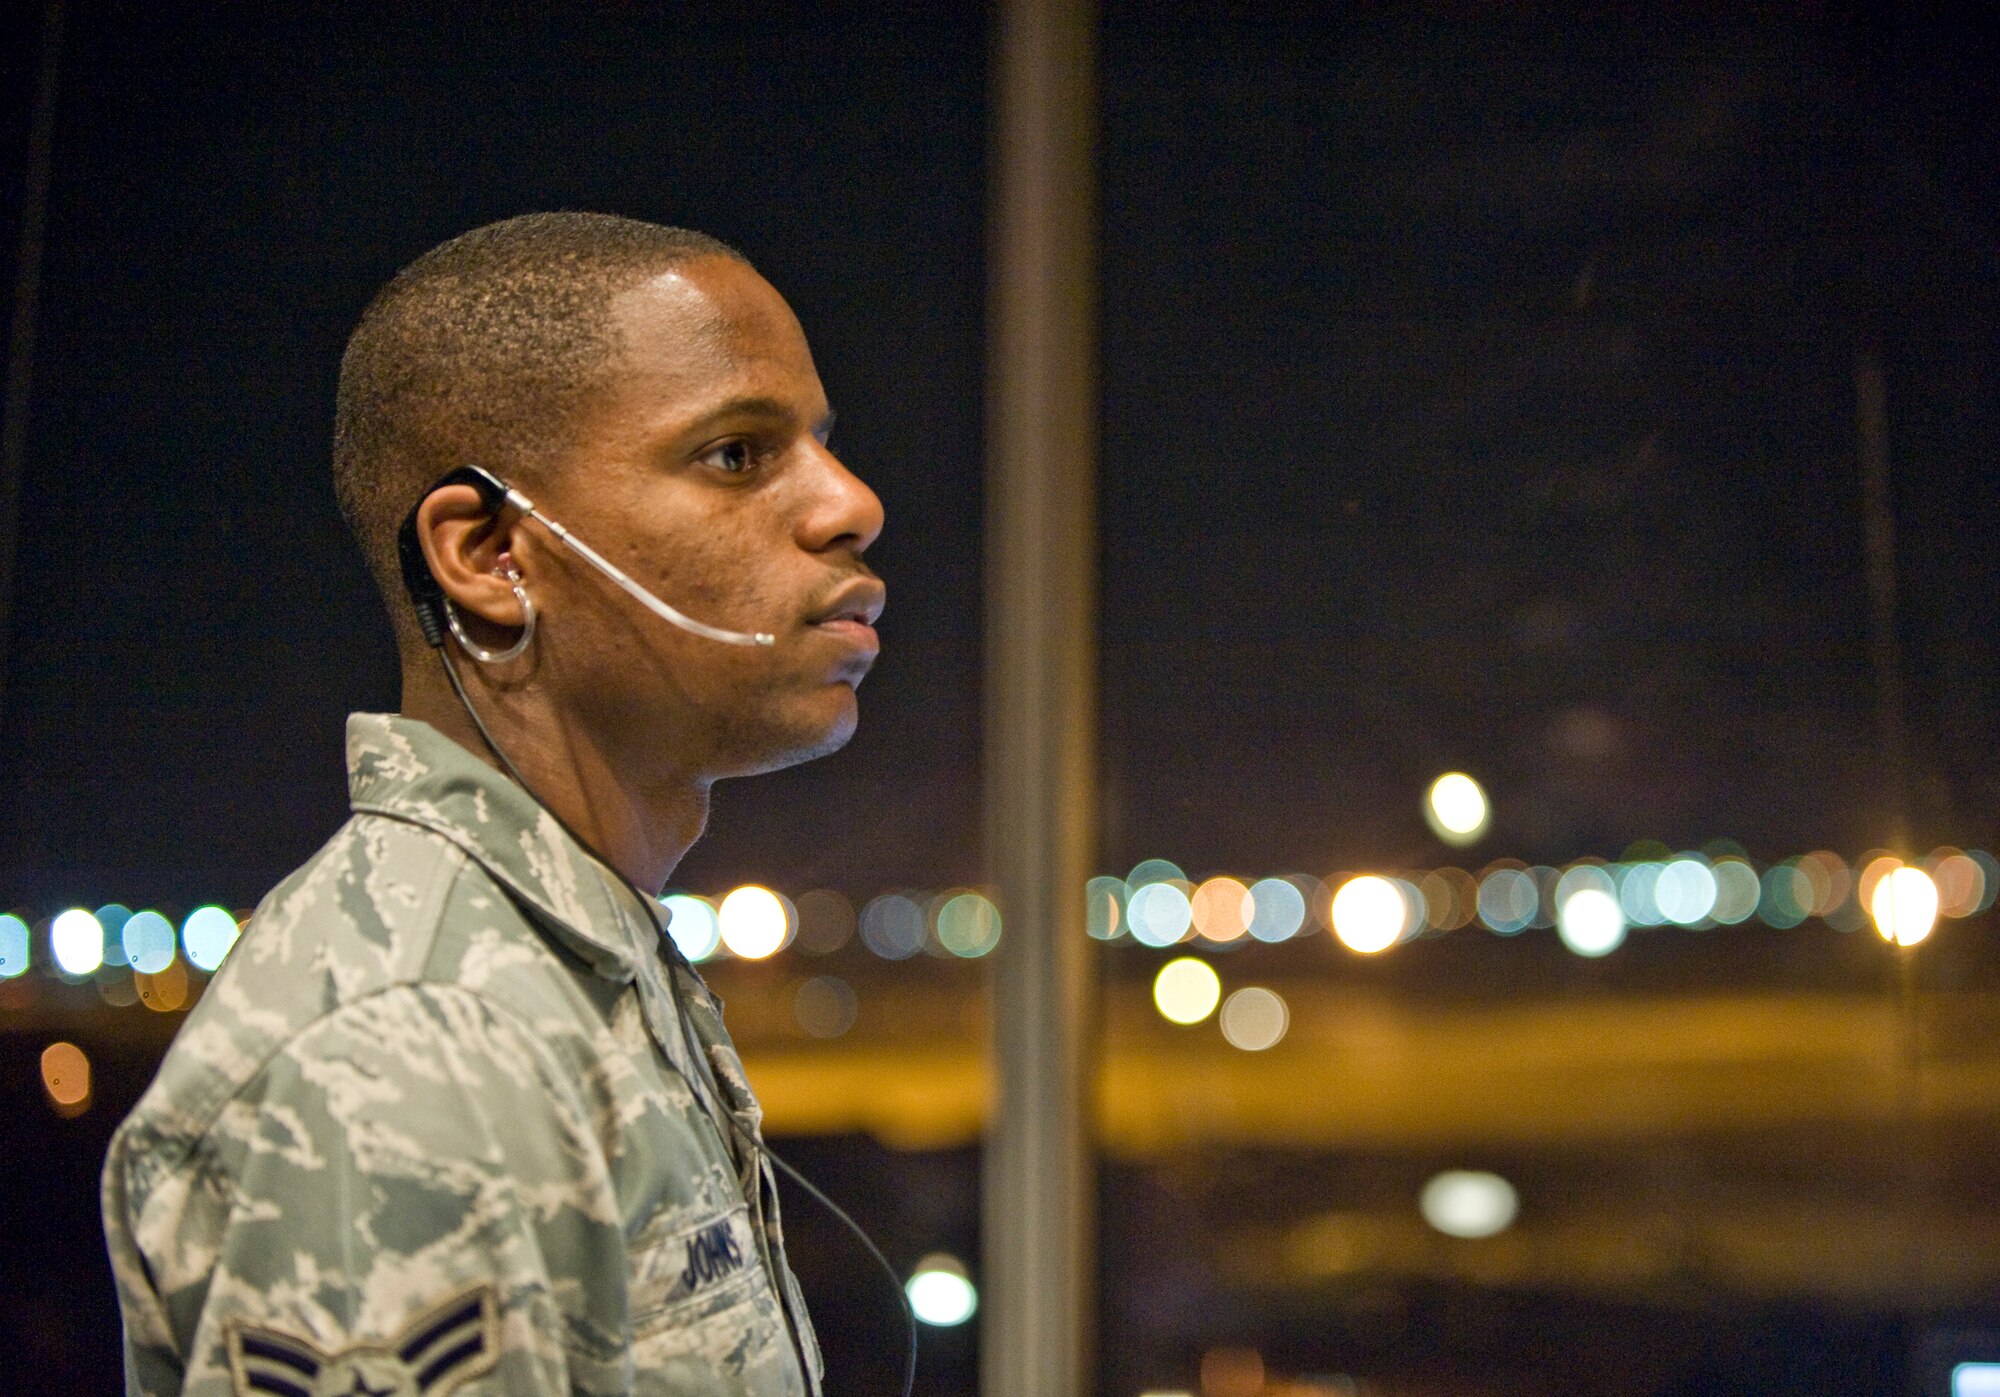 Airman 1st Class Courtney Johns, an air traffic controller with the 2nd Operations Support Squadron, watches over the airfield from the control tower on Barksdale Air Force Base, La., Jan. 12. ATCs undergo intense training and evaluation before they are certified to control aircraft. Due to the high volume of training missions accomplished here, ATCs must man the tower 24/7. (U.S. Air Force photo/Senior Airman Chad Warren)(RELEASED)